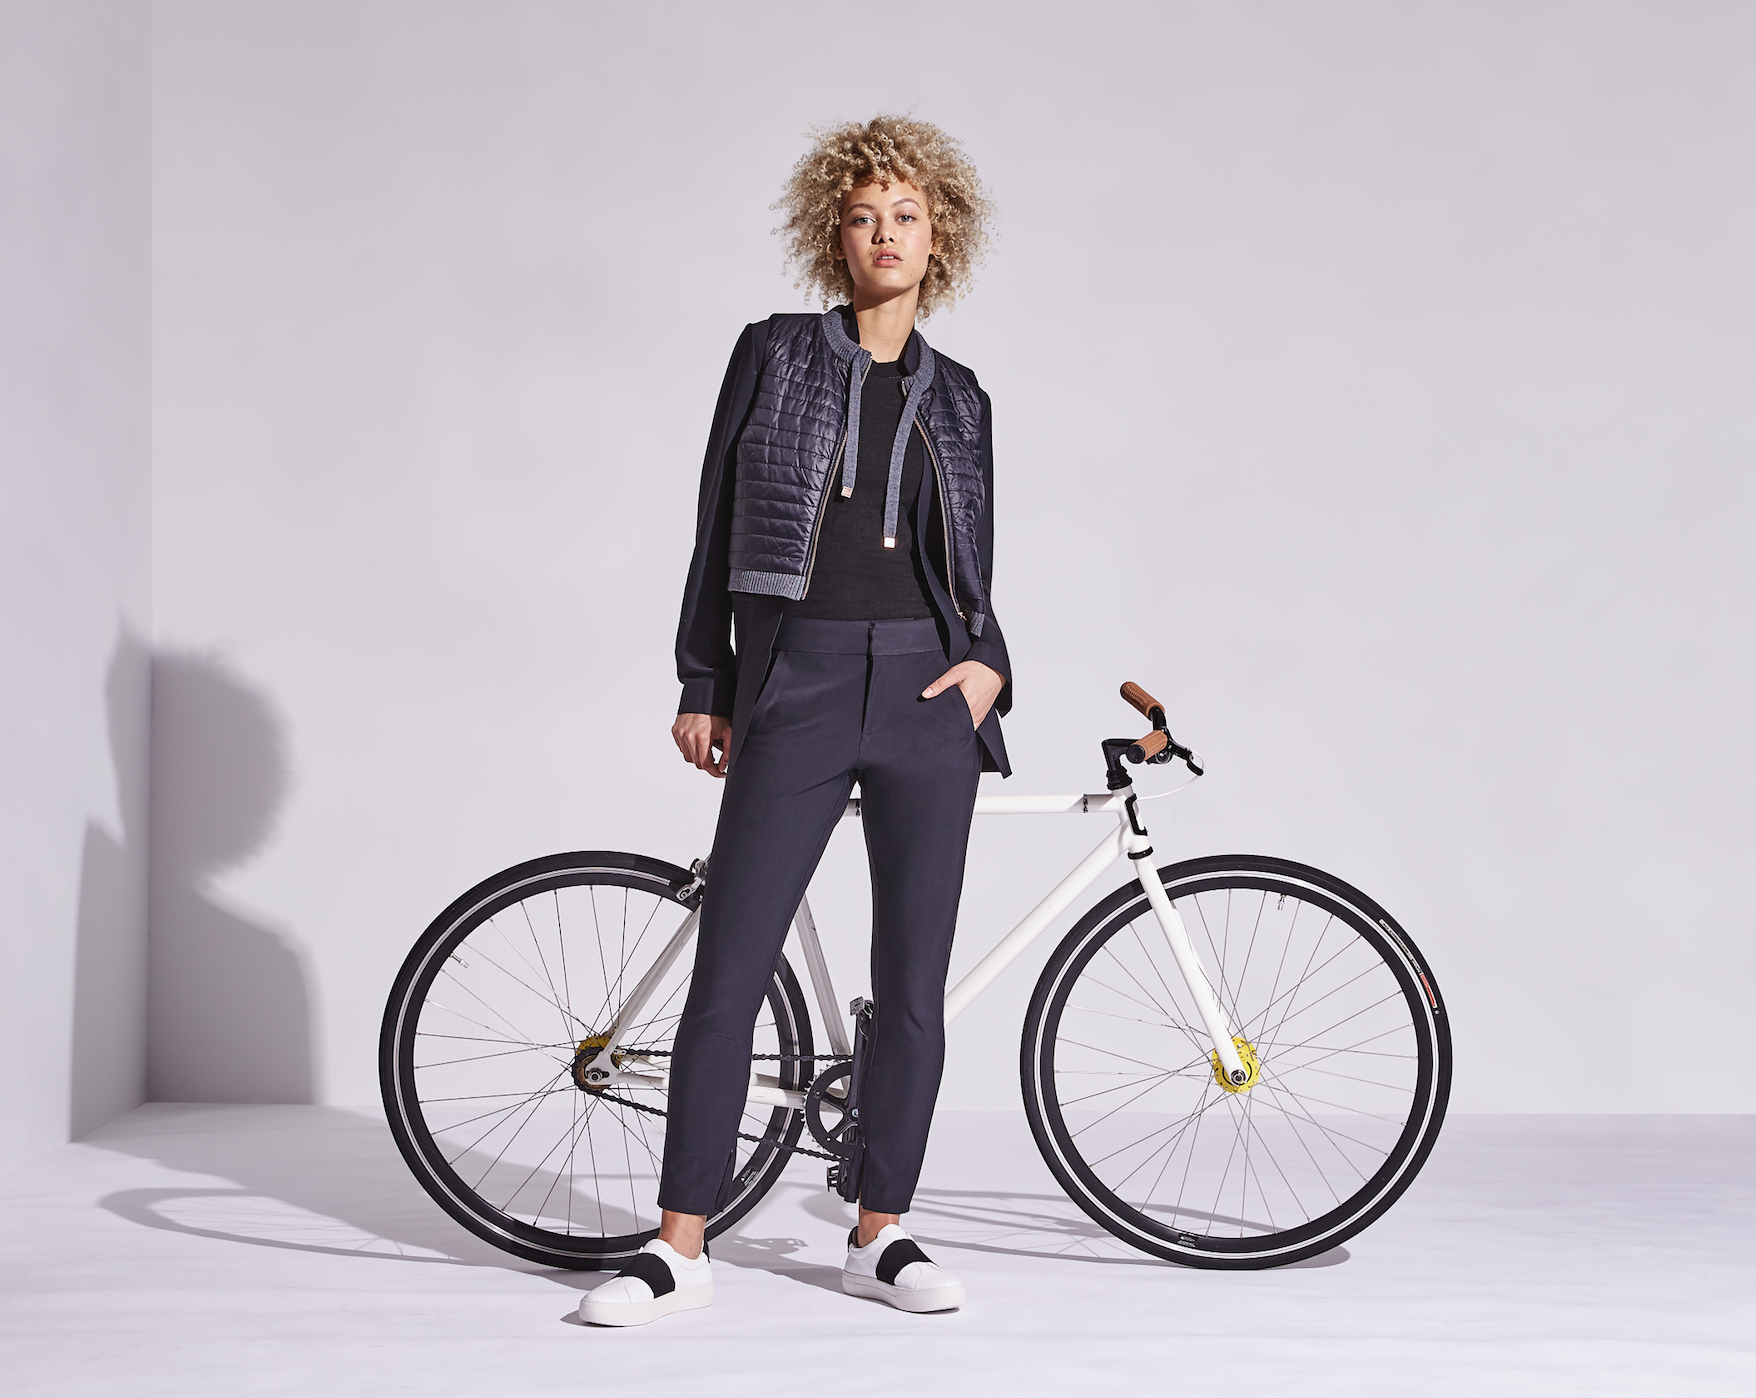 How To: Bike Commuting in a Suit | Let's Go Ride a Bike